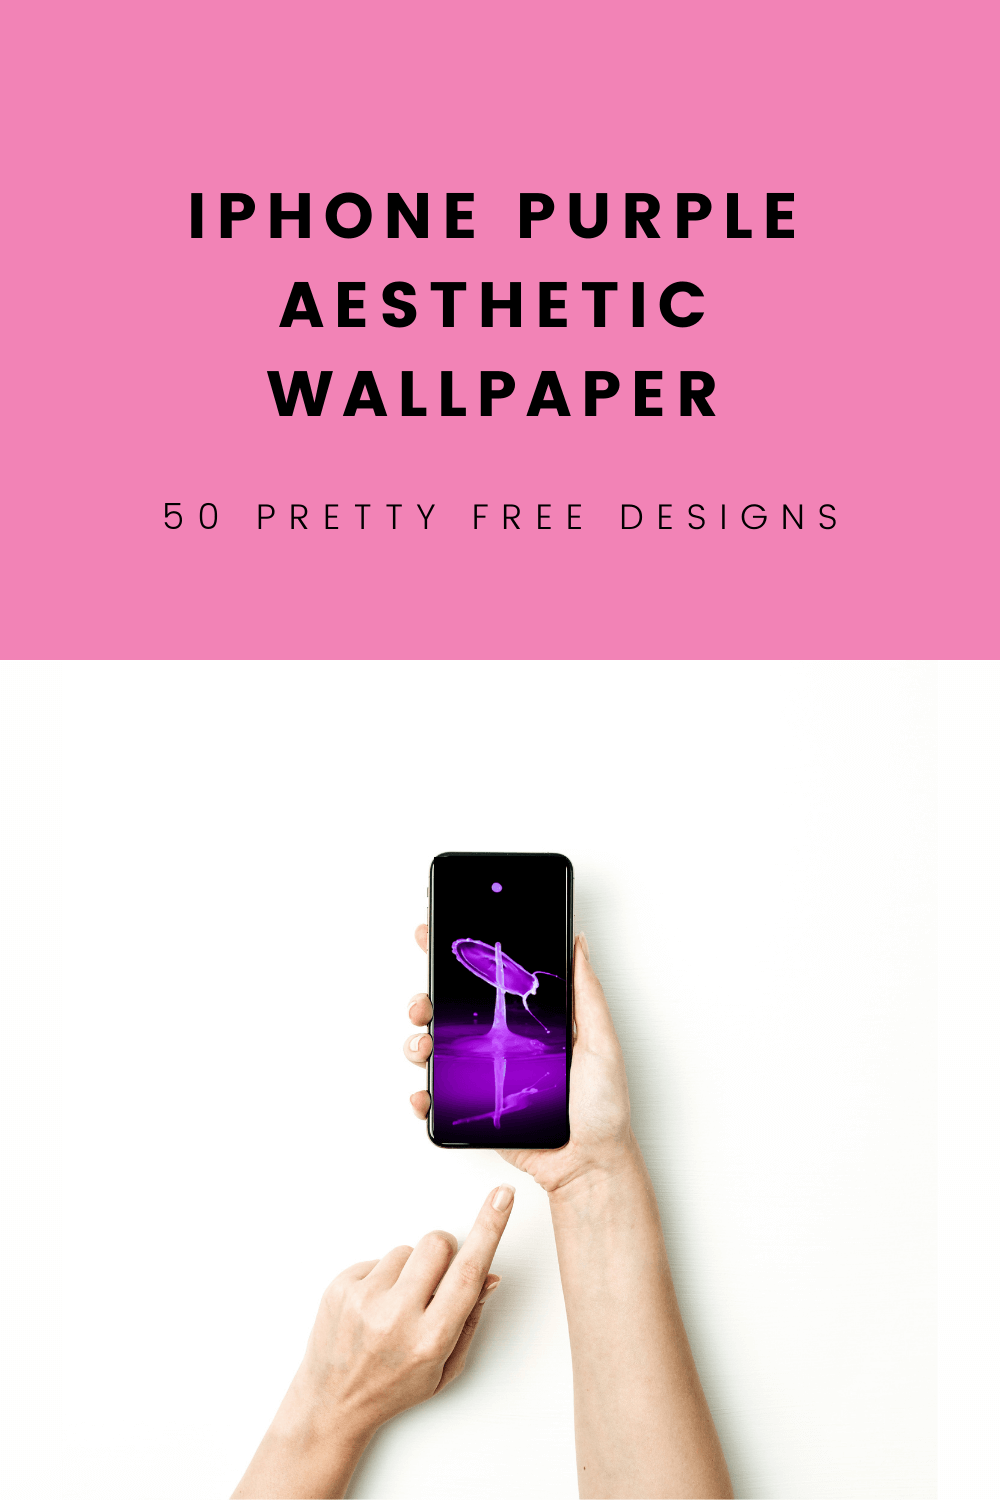 IPhone Purple Aesthetic Wallpaper: 50 FREE Gorgeous Designs For Your Phone